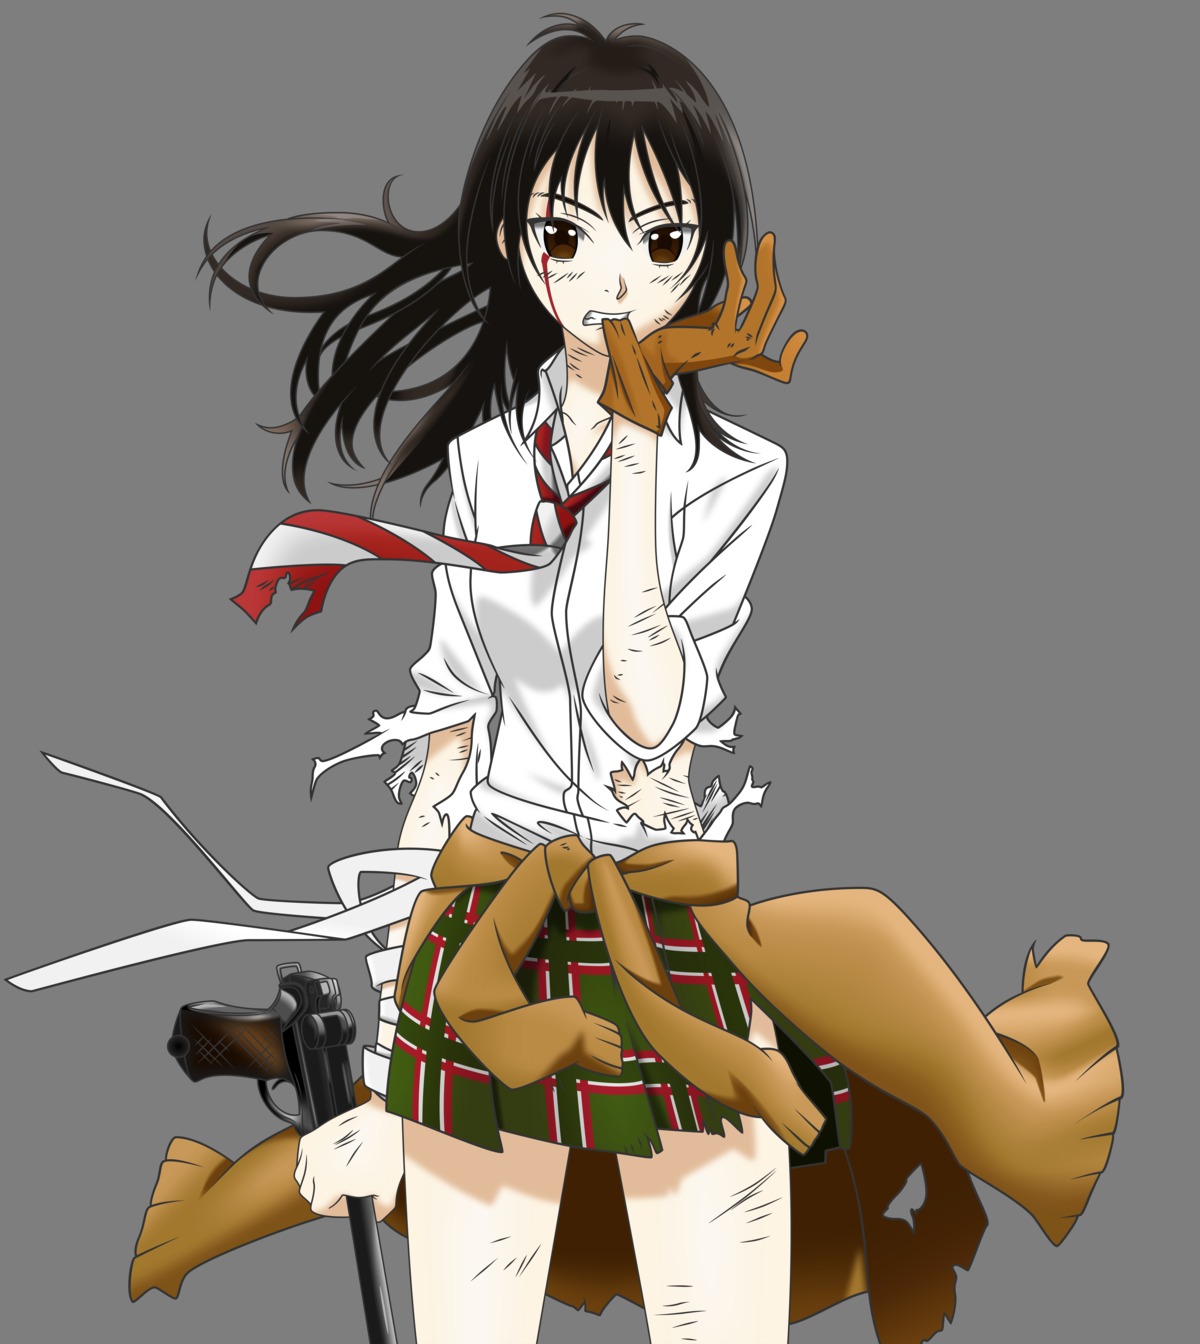 Coppelion - Other & Anime Background Wallpapers on Desktop Nexus (Image  1654892)